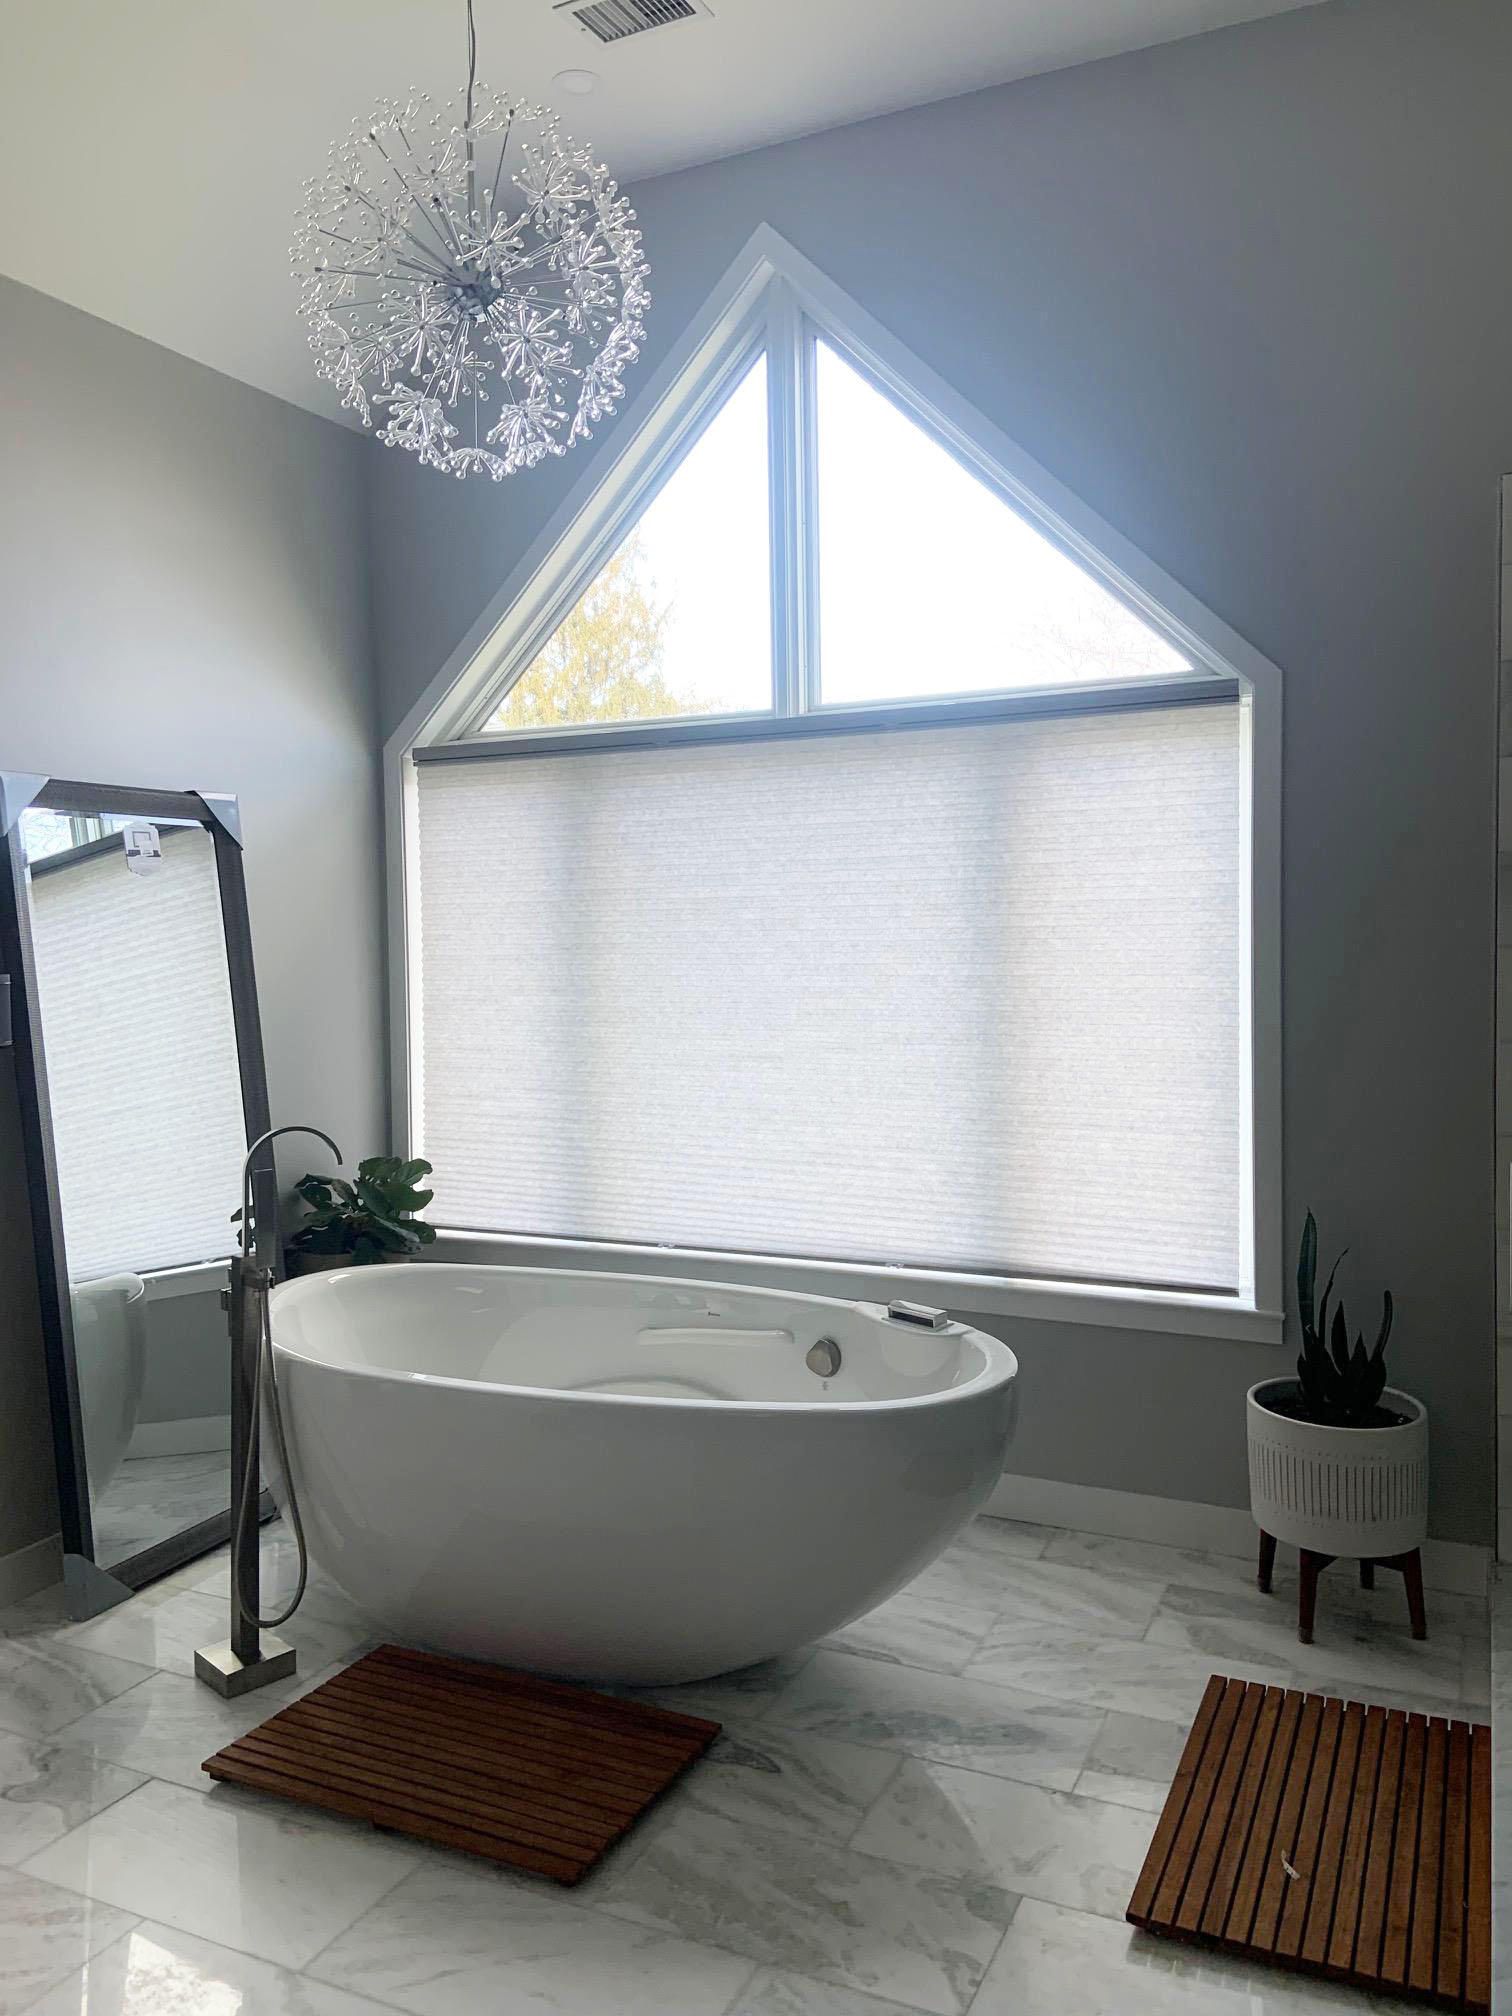 We LOVE this recent install in Barrington! Light filtering cellular blinds in a dreamy bathroom. Ahhh...